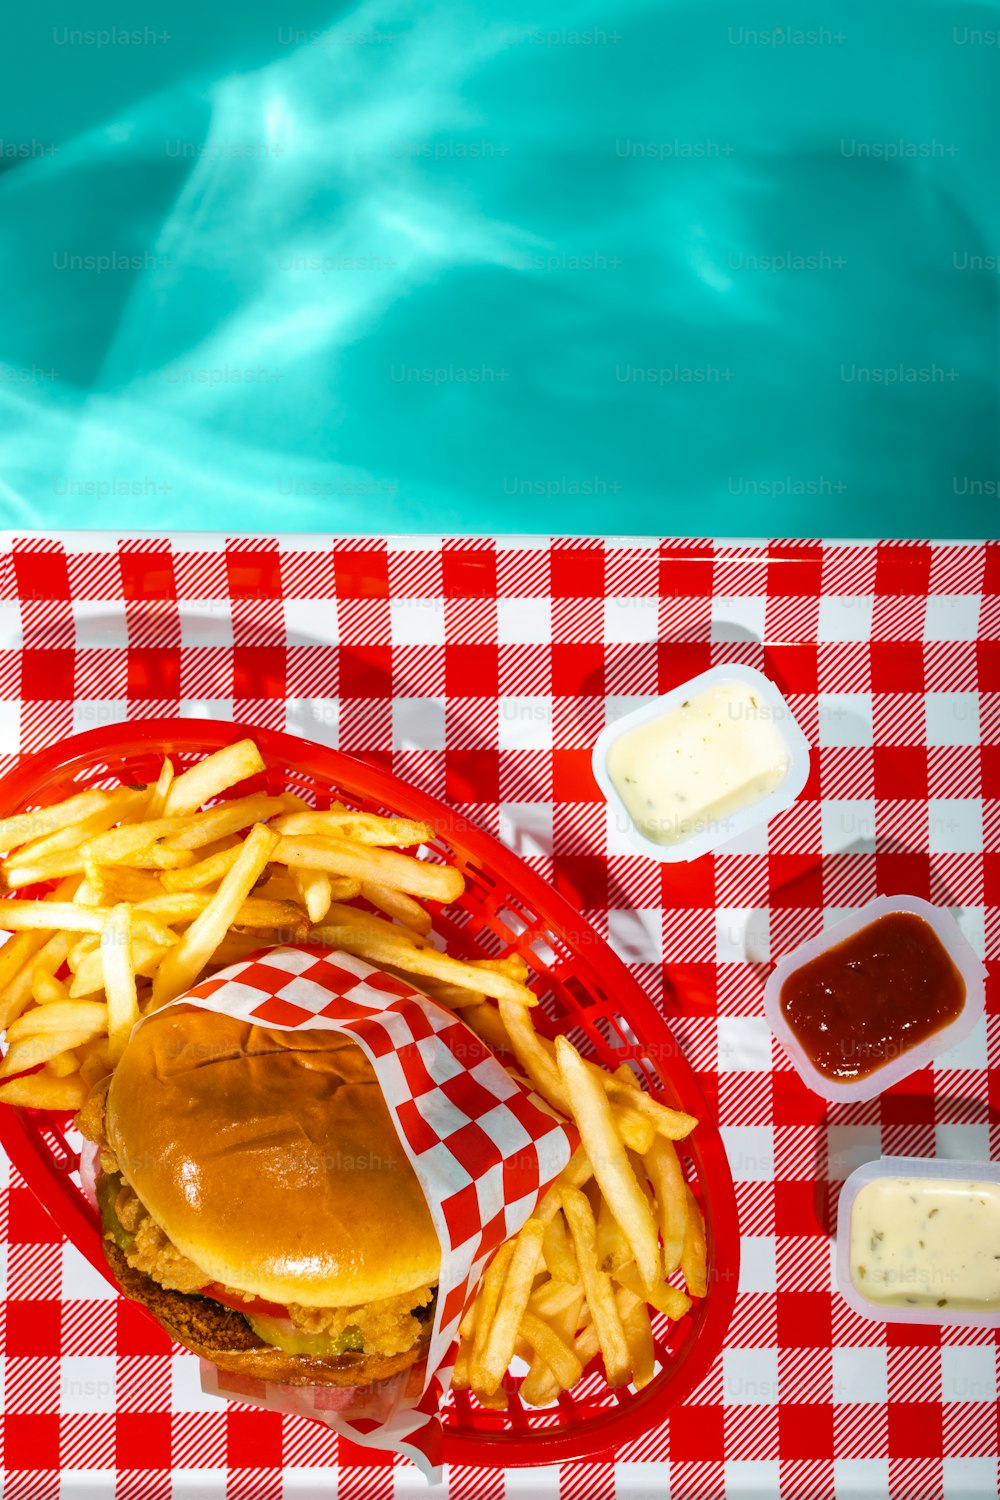 a hamburger and french fries on a red and white checkered tablecloth